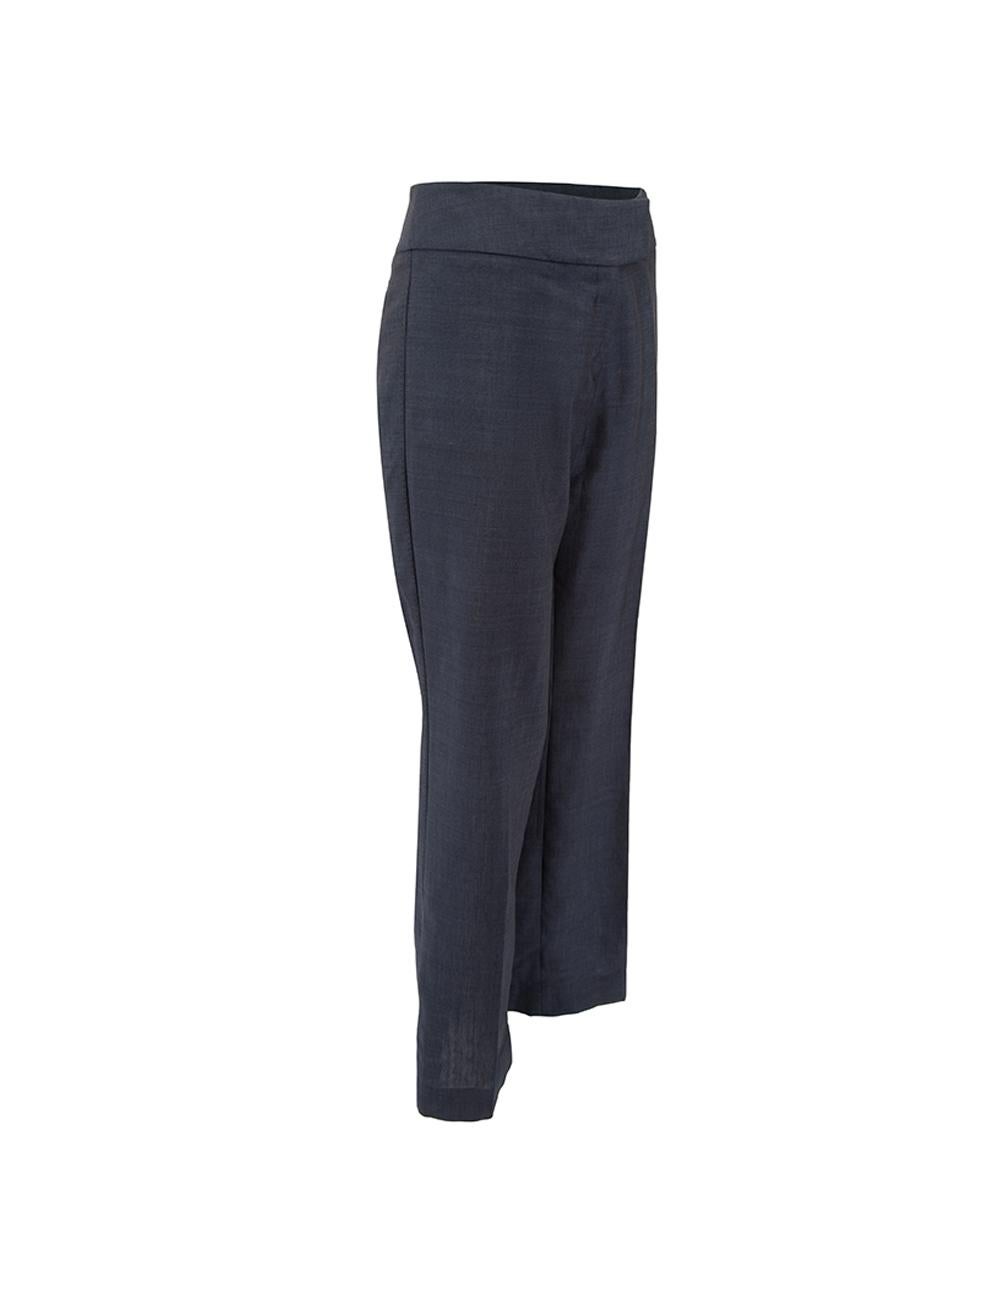 CONDITION is Very good. Minimal wear to trousers is evident. Minimal wear to the rear-left with faint markings on this used Karen Millen designer resale item. 



Details


Navy

Viscose

Flared trousers

Low rise

Front zip closure with clasps and